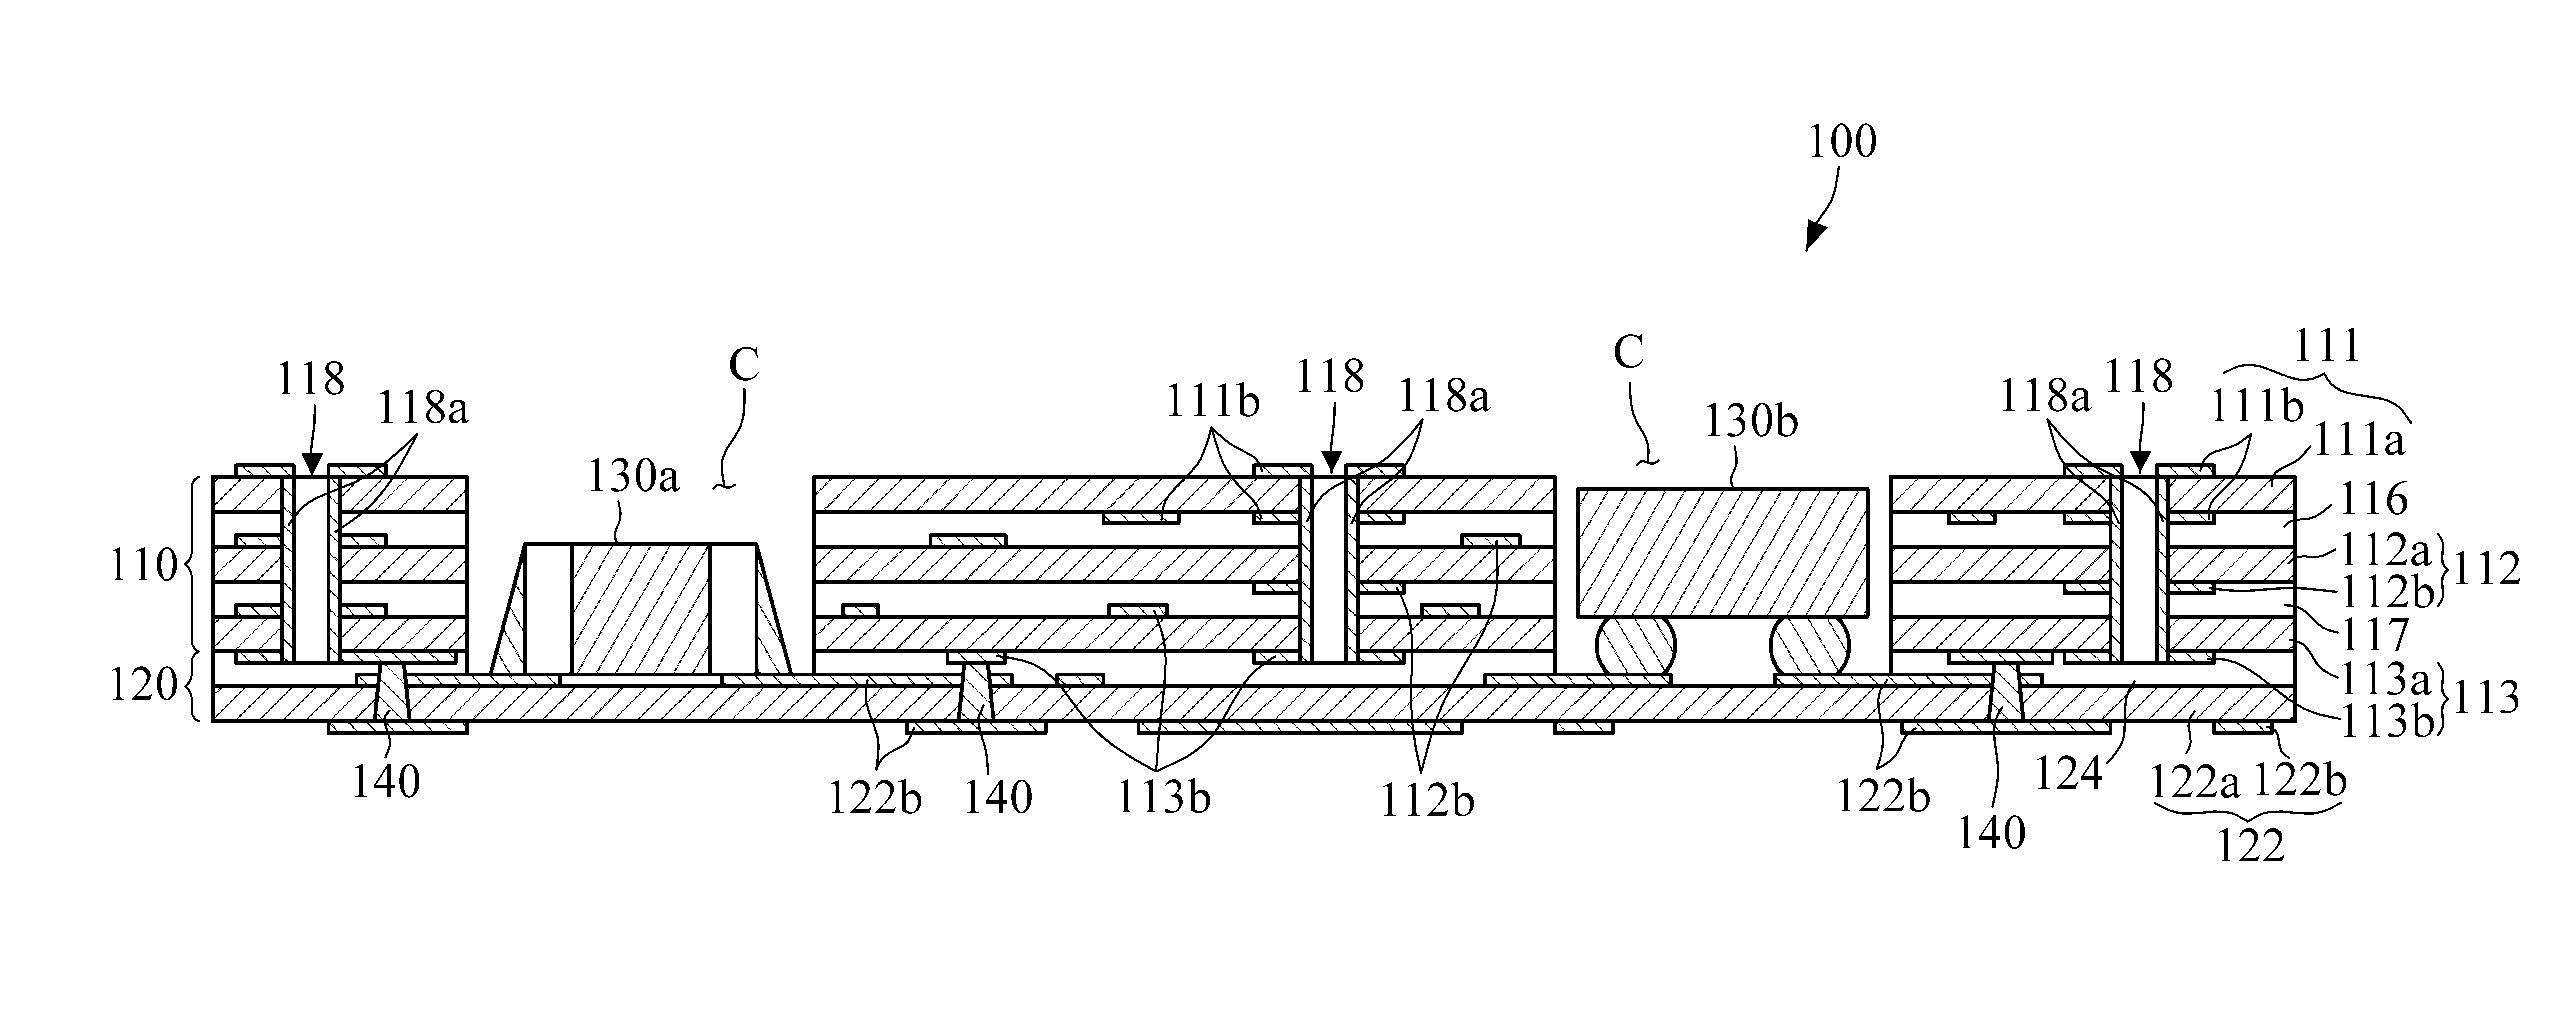 Multilayer laminate package and method of manufacturing the same